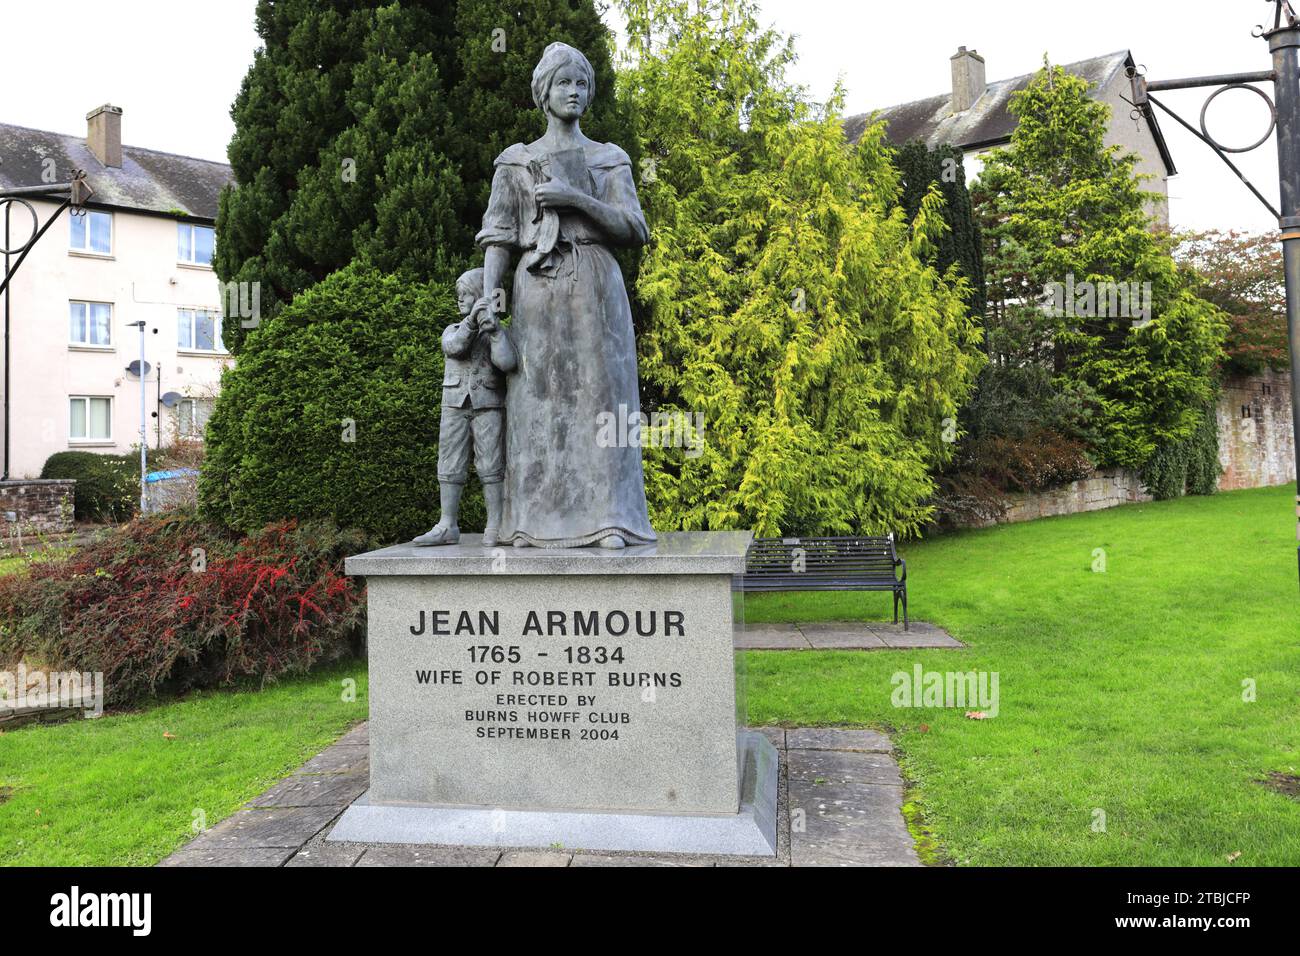 The Statue Of Jean Armour Robert Burns Wife Dumfries Town Dumfries And Galloway Scotland Uk